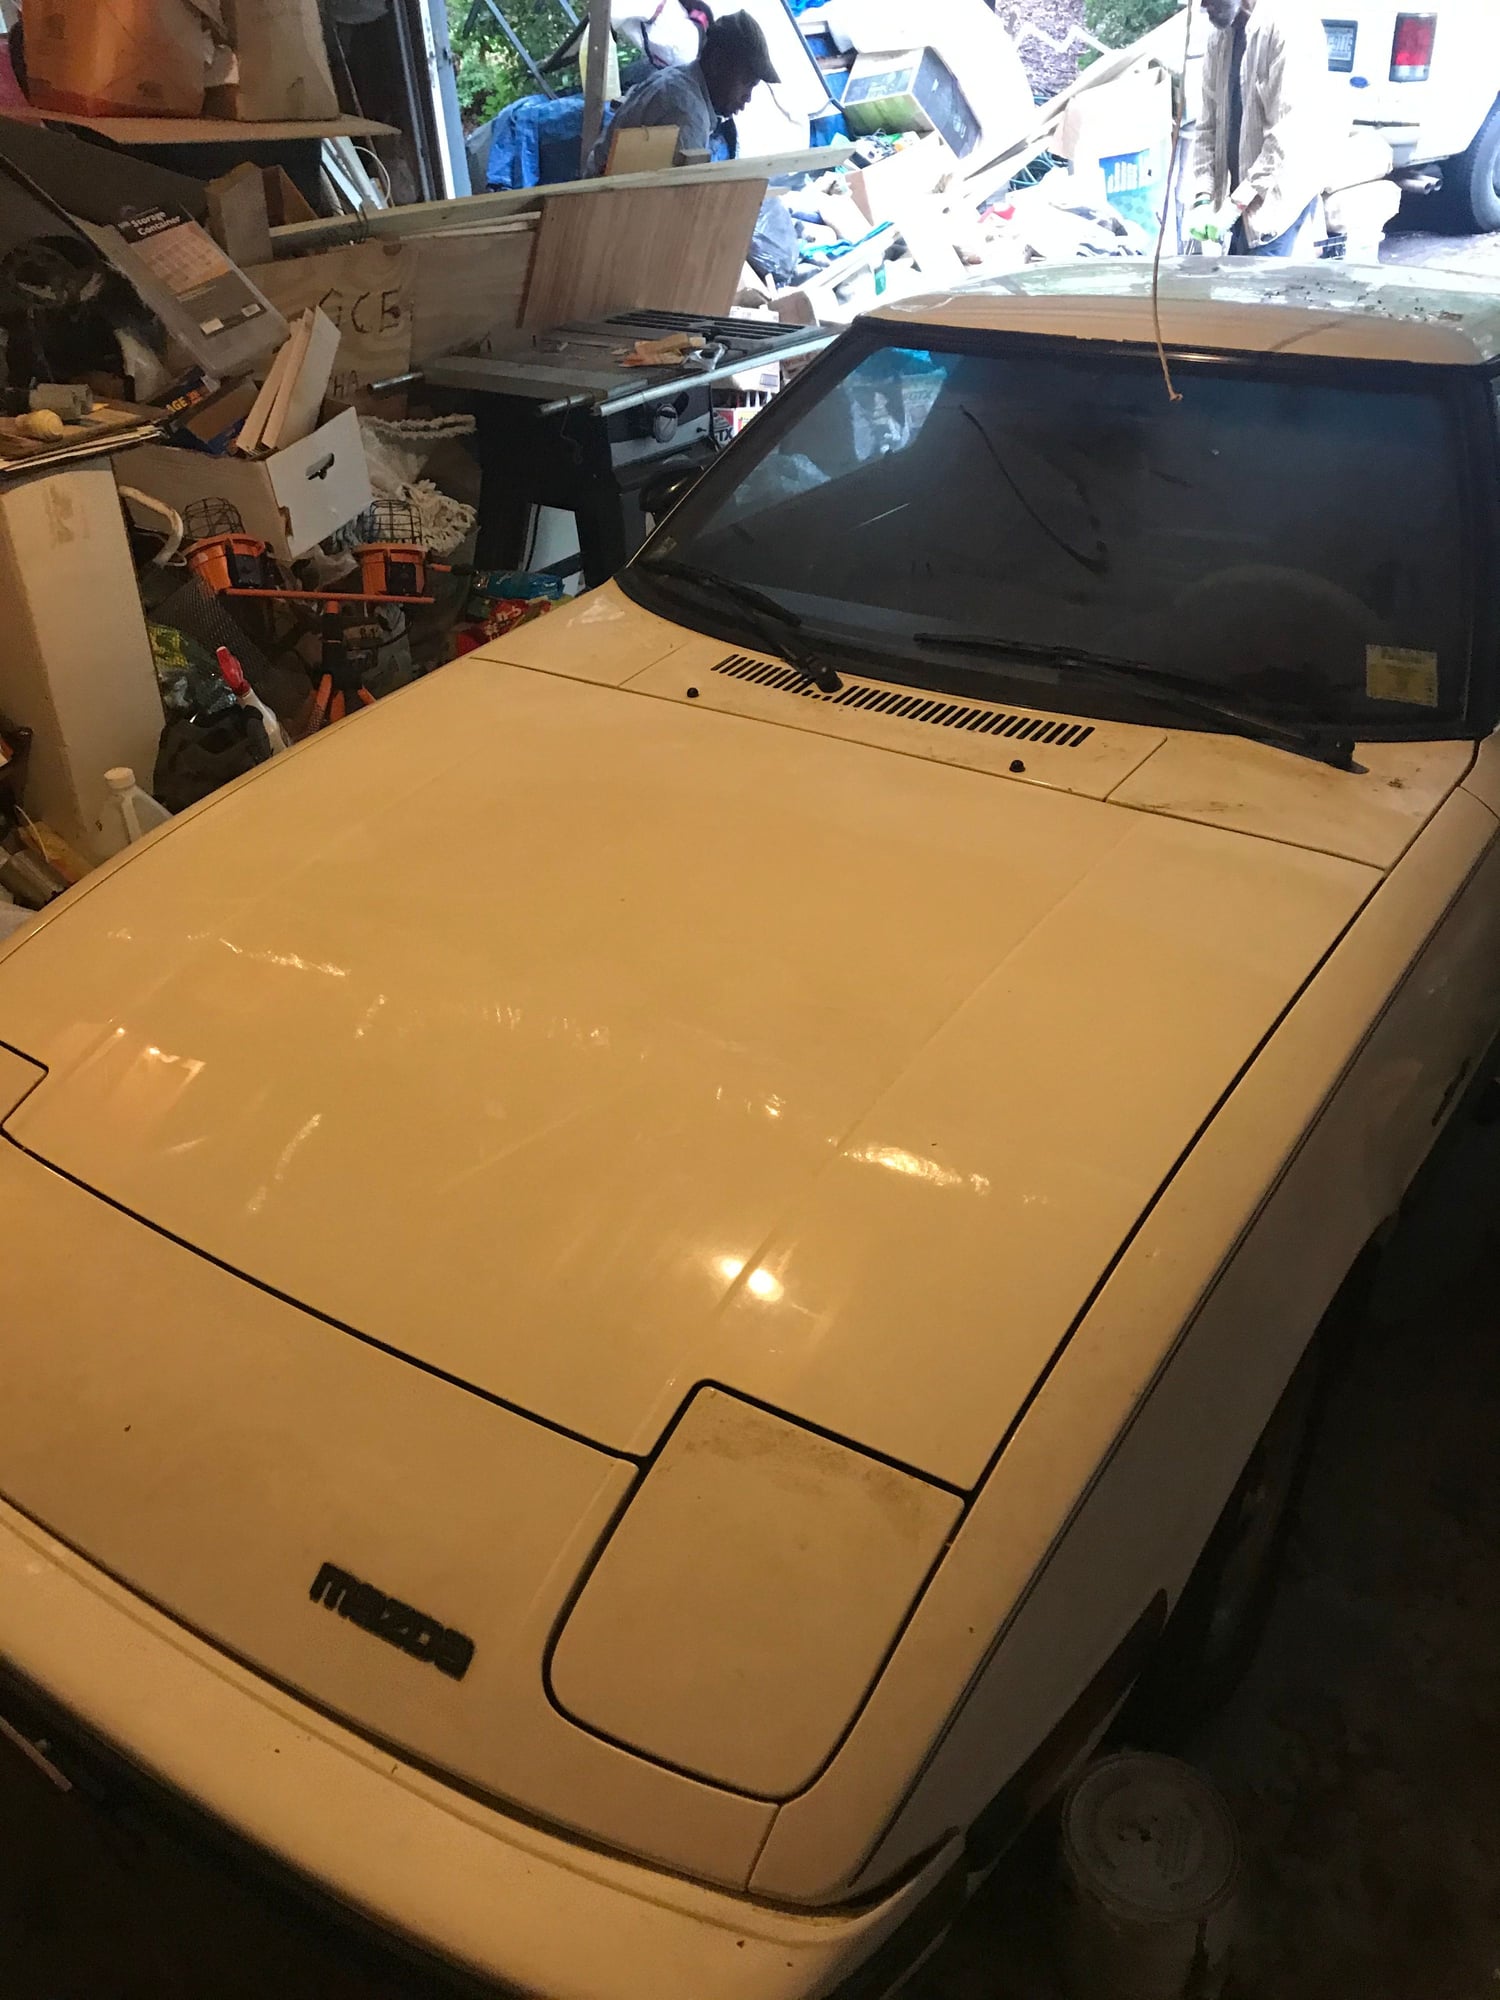 1985 Mazda RX-7 - 1985 Mazda RX7 GS Project Car - Used - VIN JM1F83312F085950C - 2WD - Automatic - Coupe - White - Raleigh, NC 80435, United States